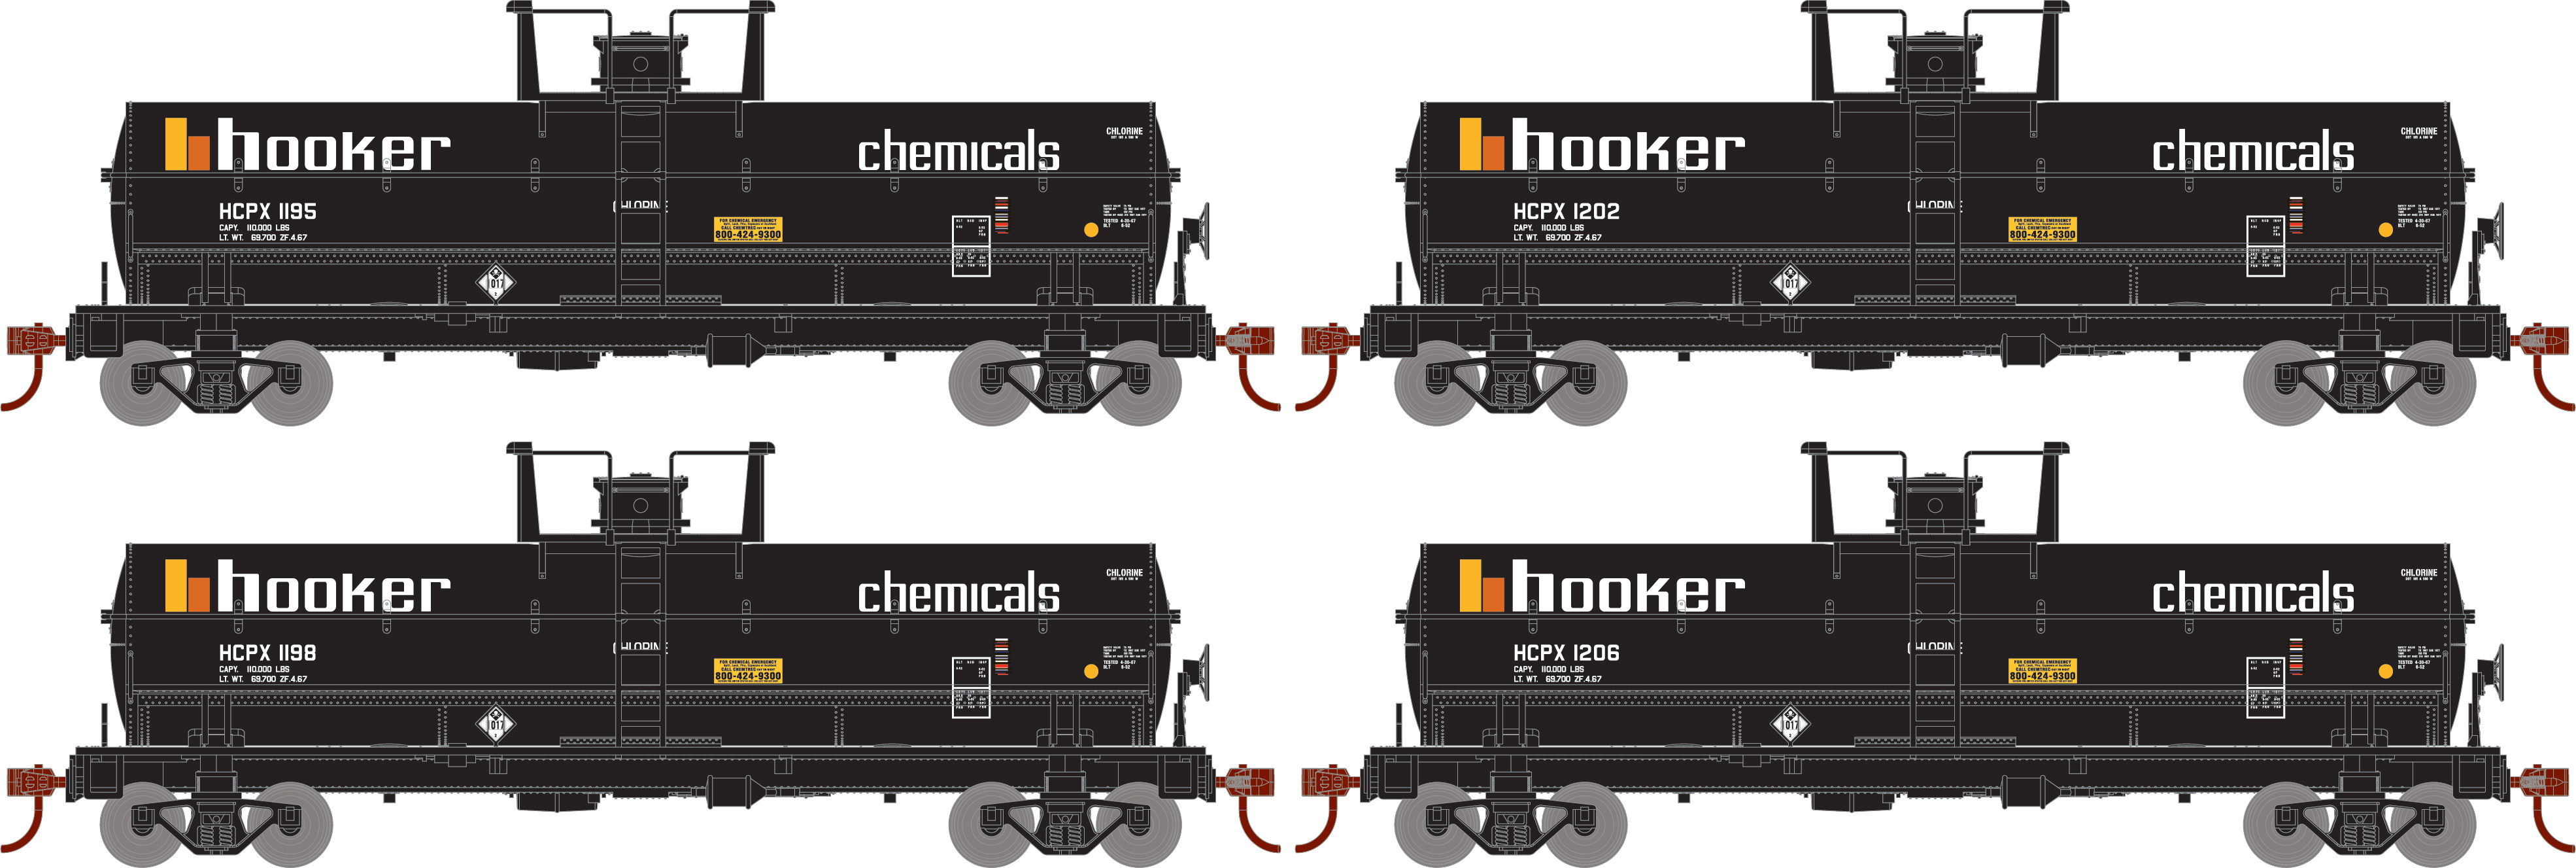 HCPX / Hooker Chemicals